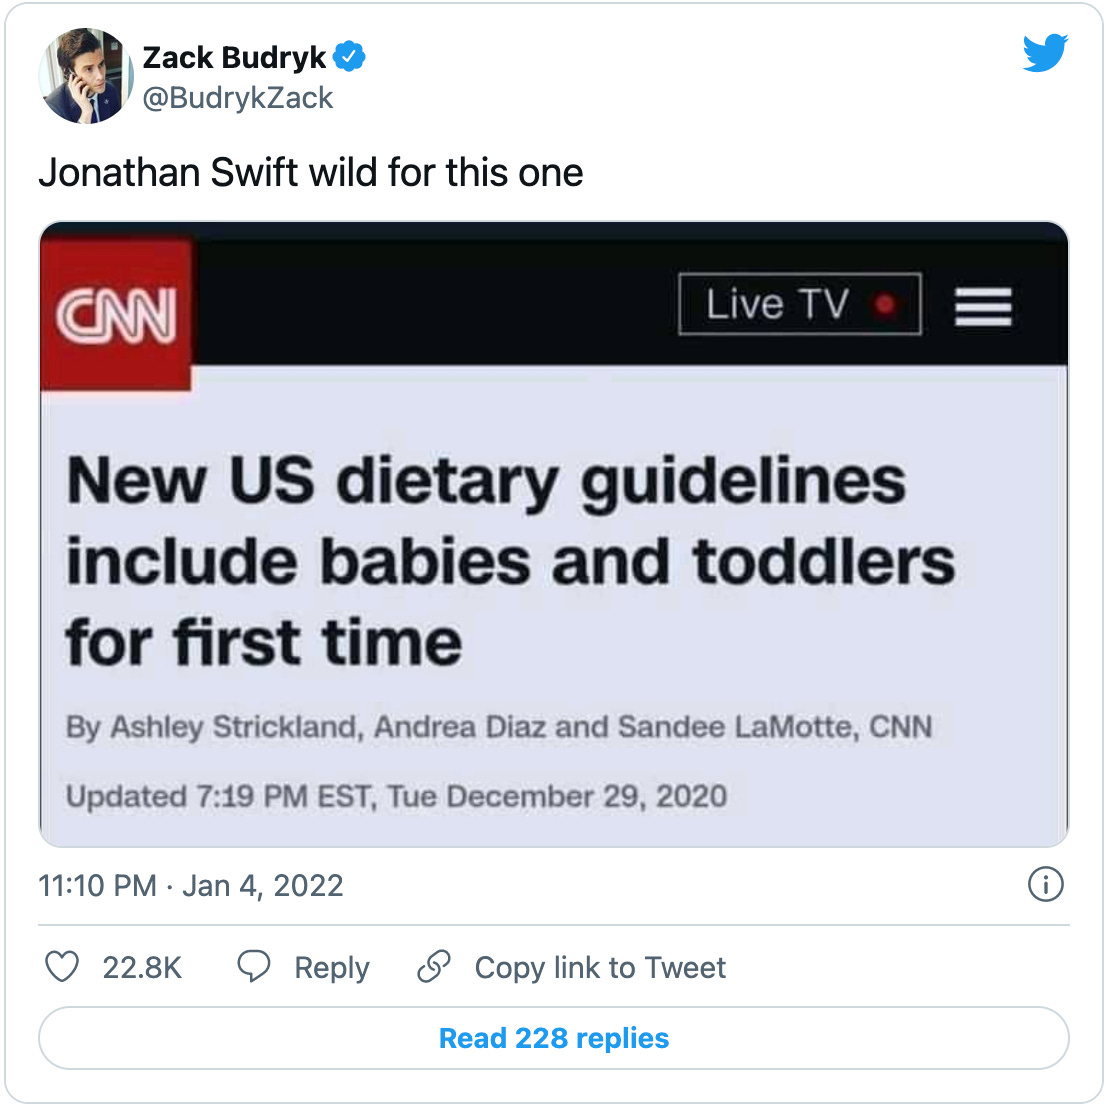 Tweet by Zack Budryk that says “Jonathan Swift wild for this one” over a screenshot of the CNN headline: “New US dietary guidelines include babies and toddler for first time”